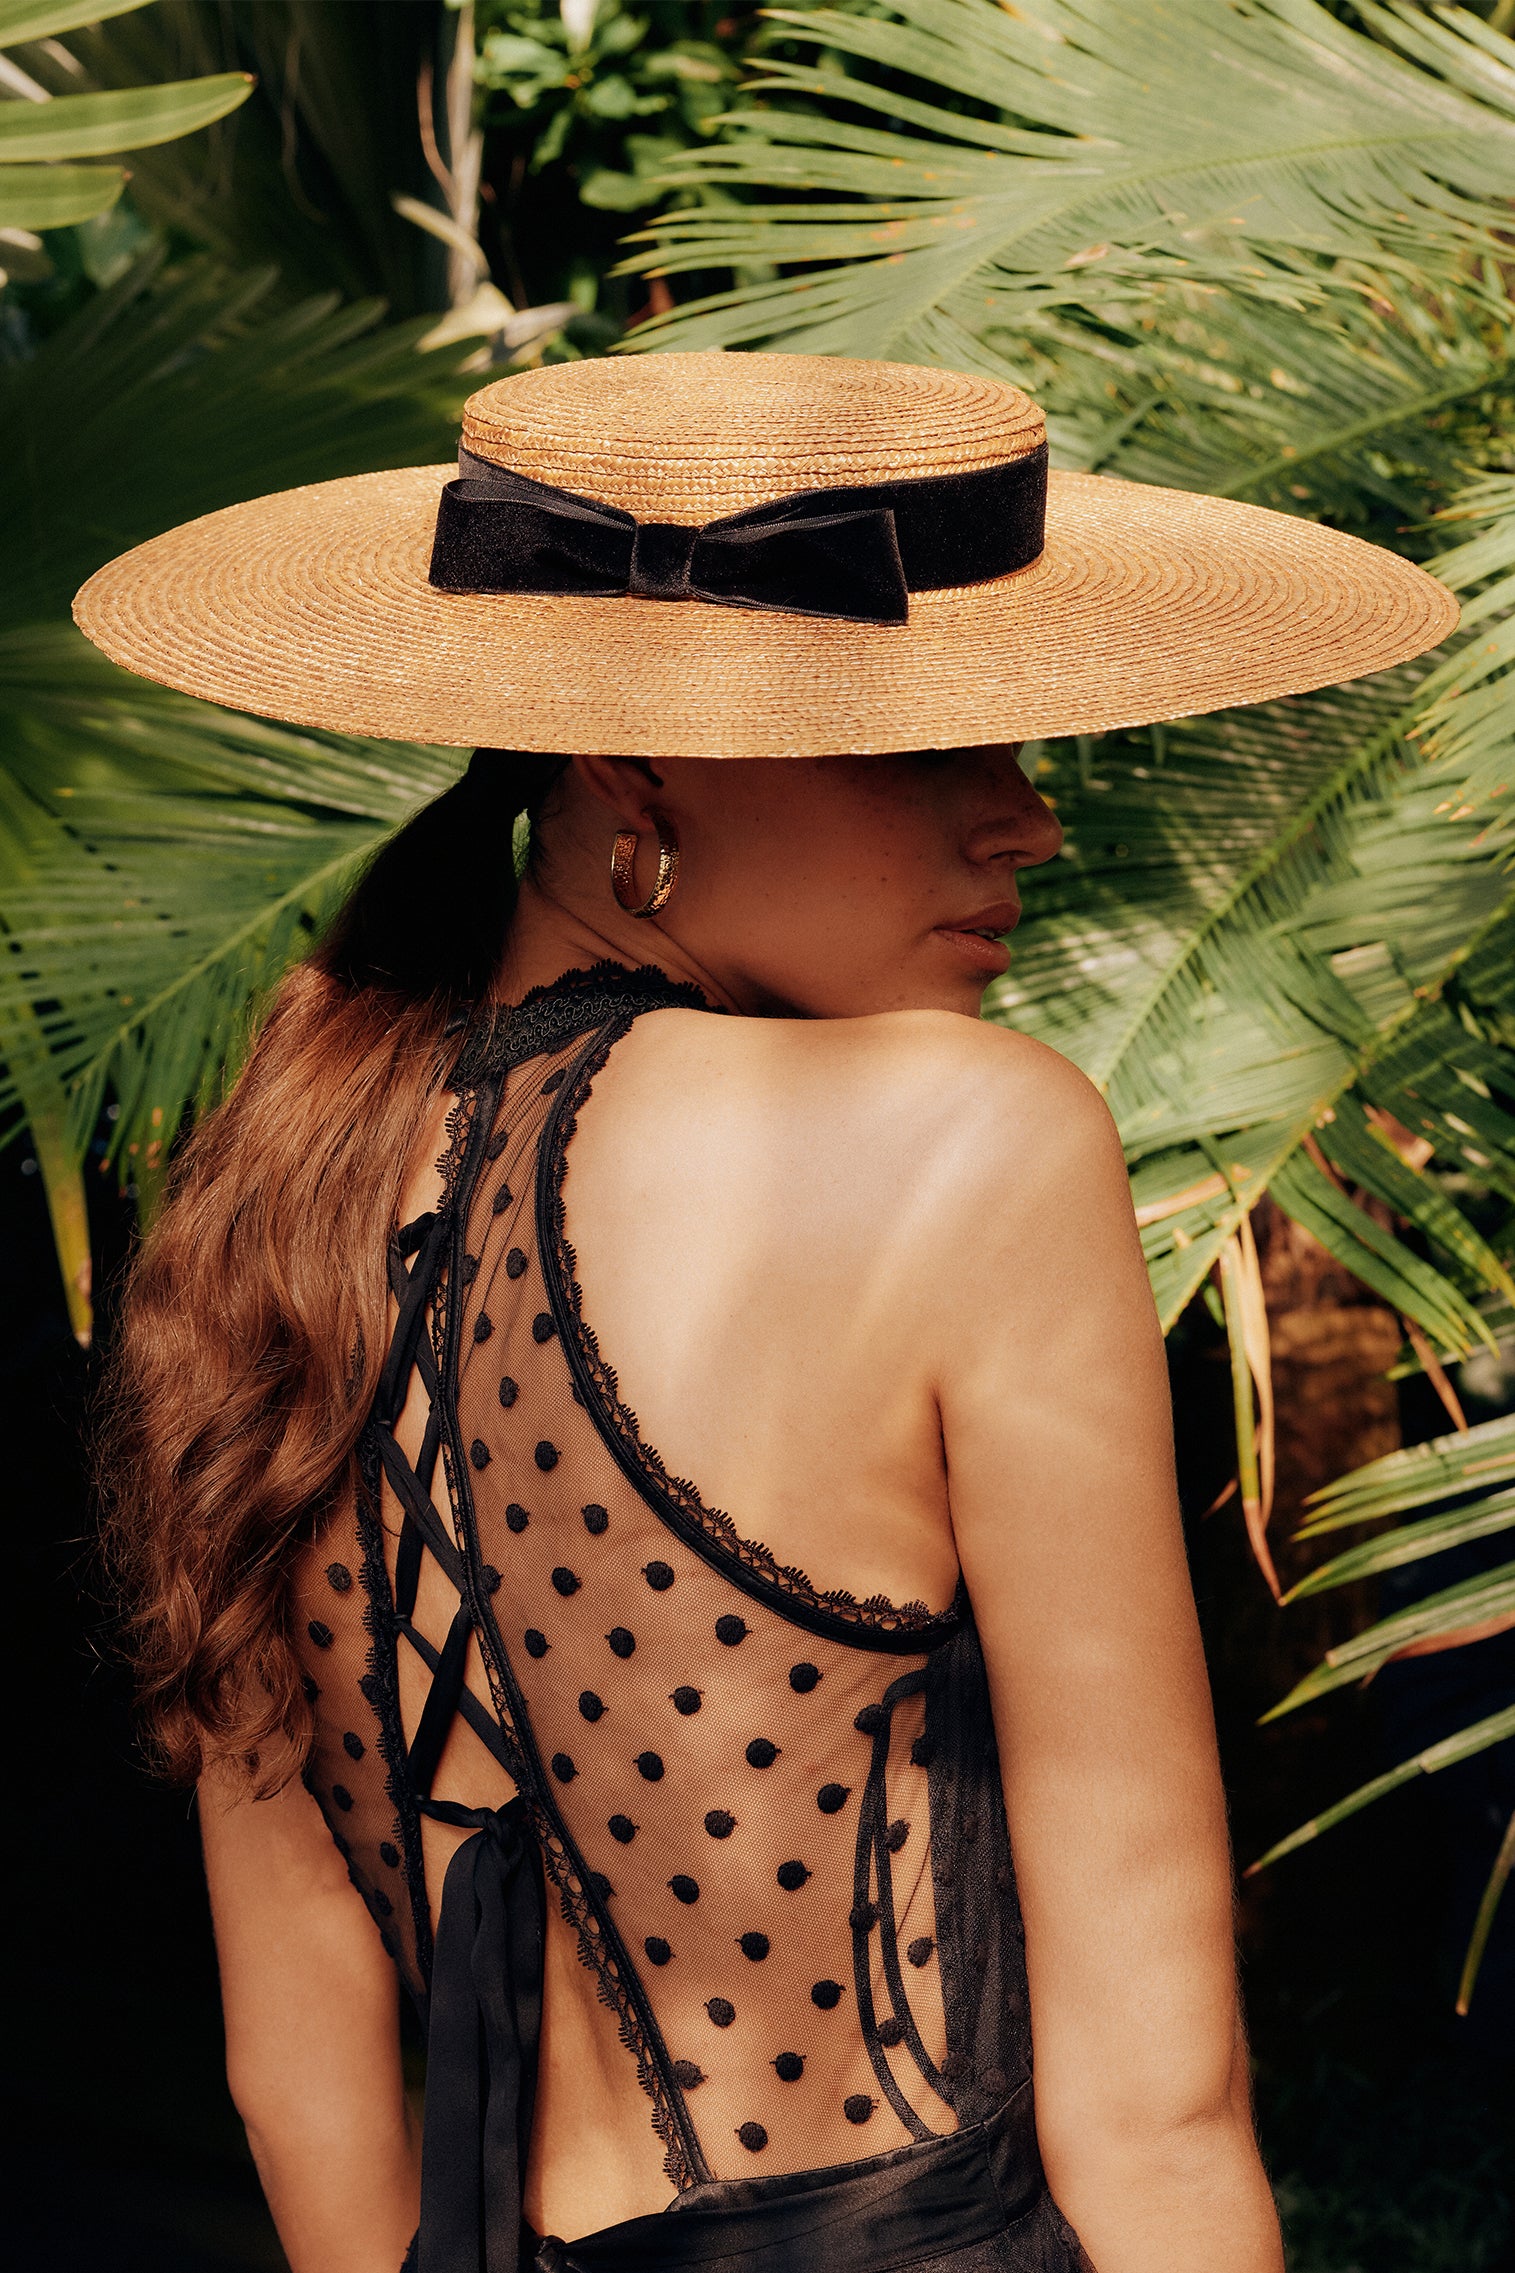 Trendy Straw Hats to Complete Your Summer Look - Gold Coast Couture